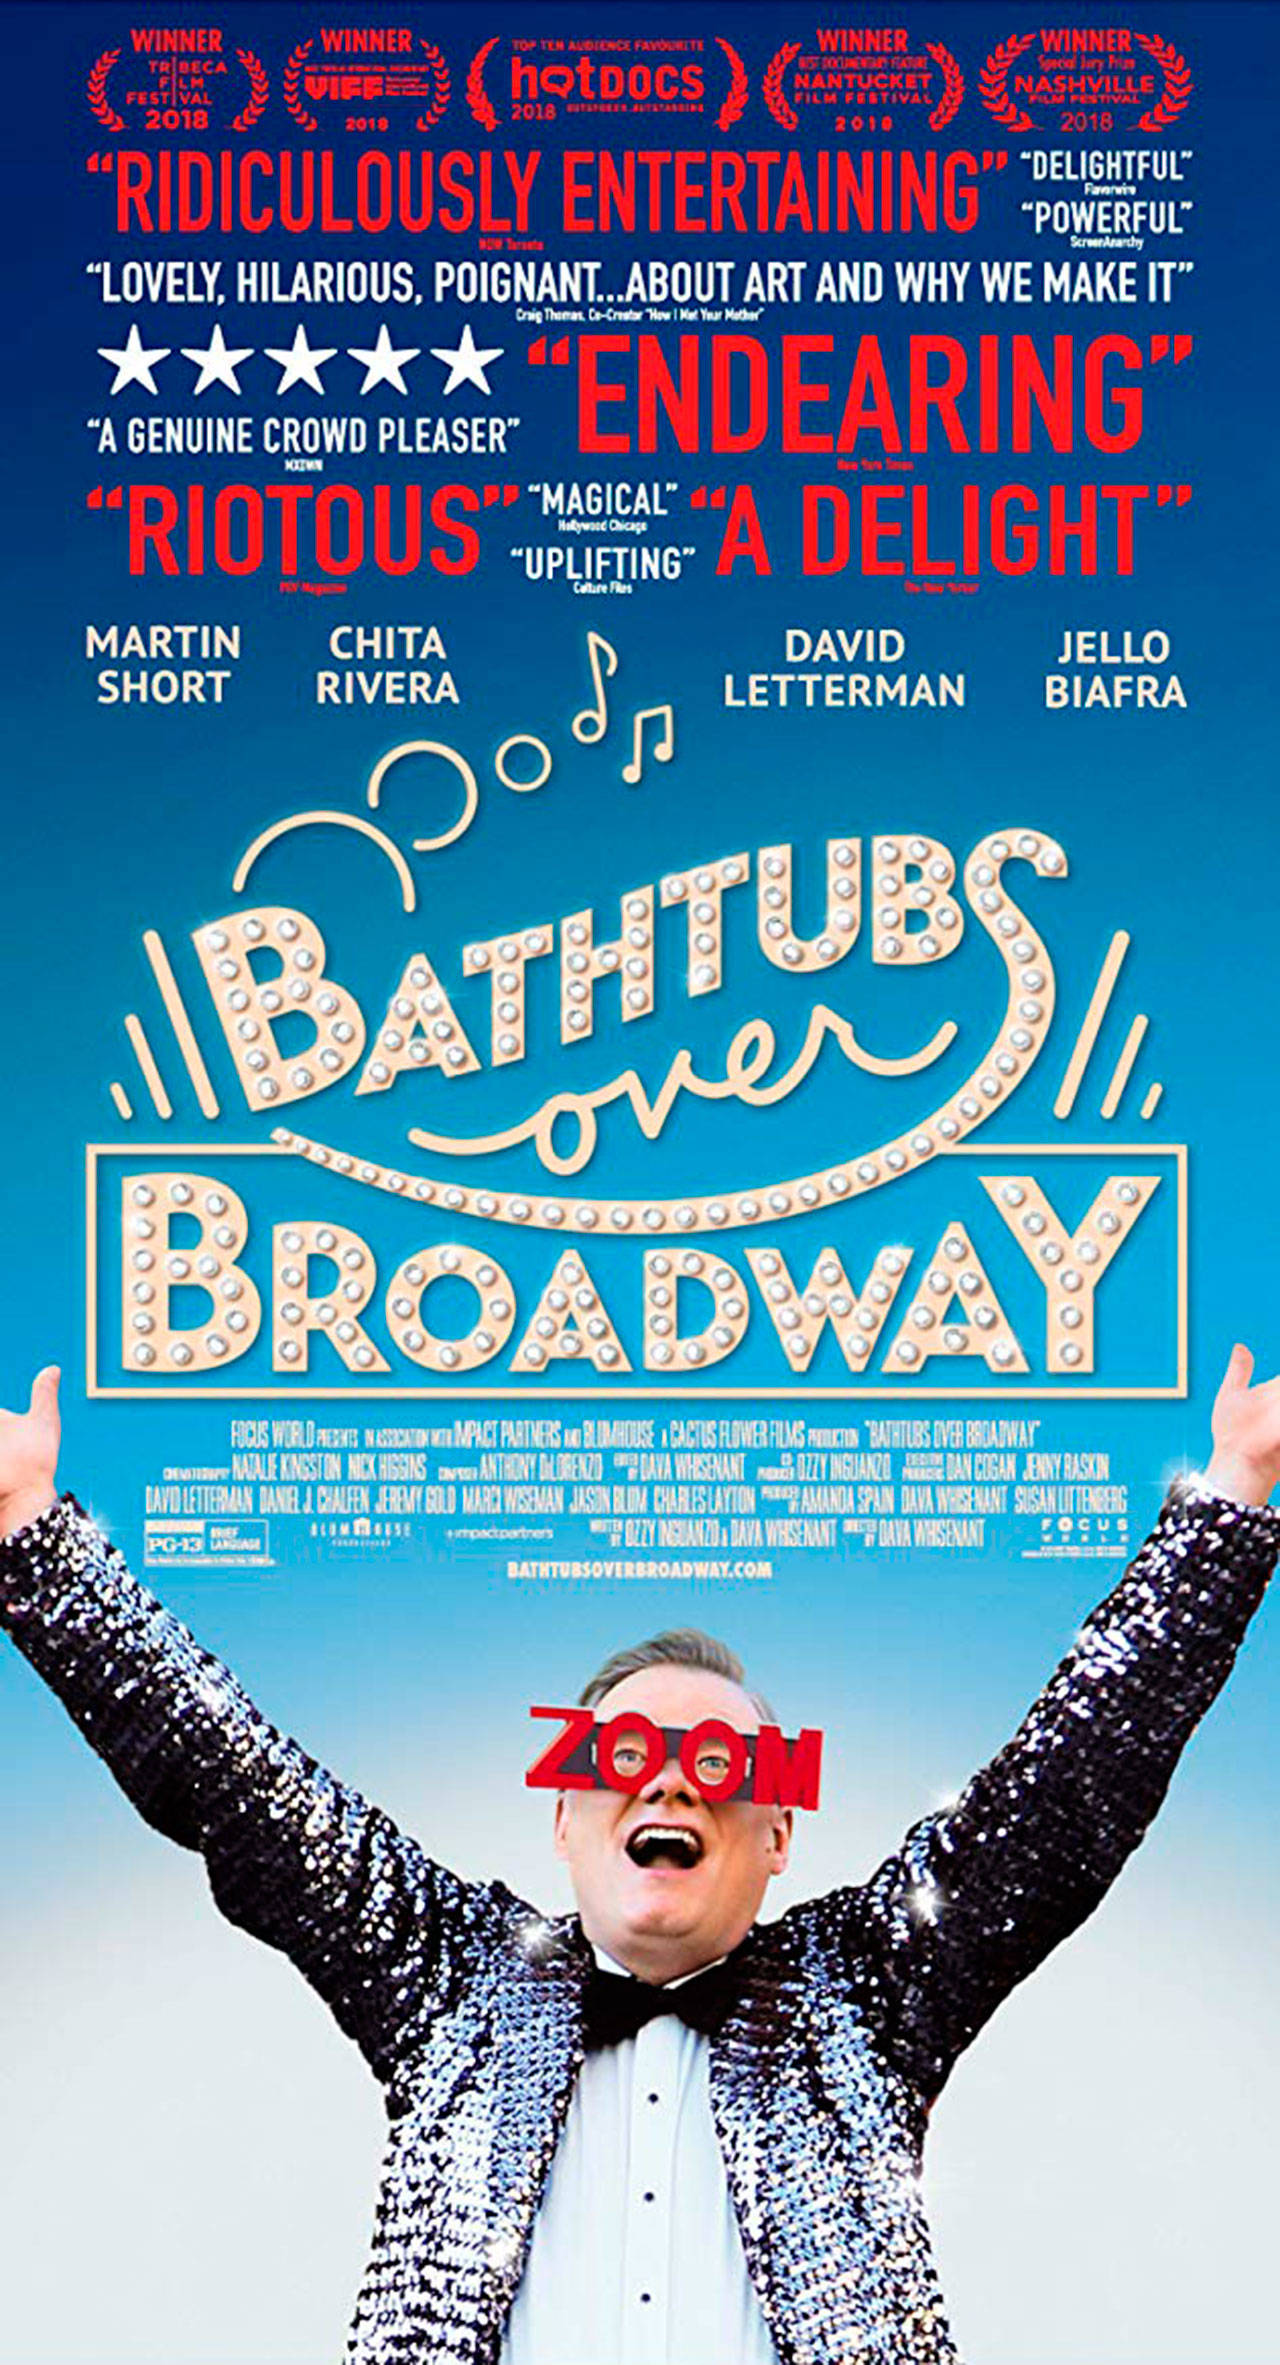 Image courtesy of Focus World | “Bathtubs Over Broadway” will screen at the Bainbridge Island Museum of Art later this month as part of the latest smARTfilms series “Quirky Musicals.”